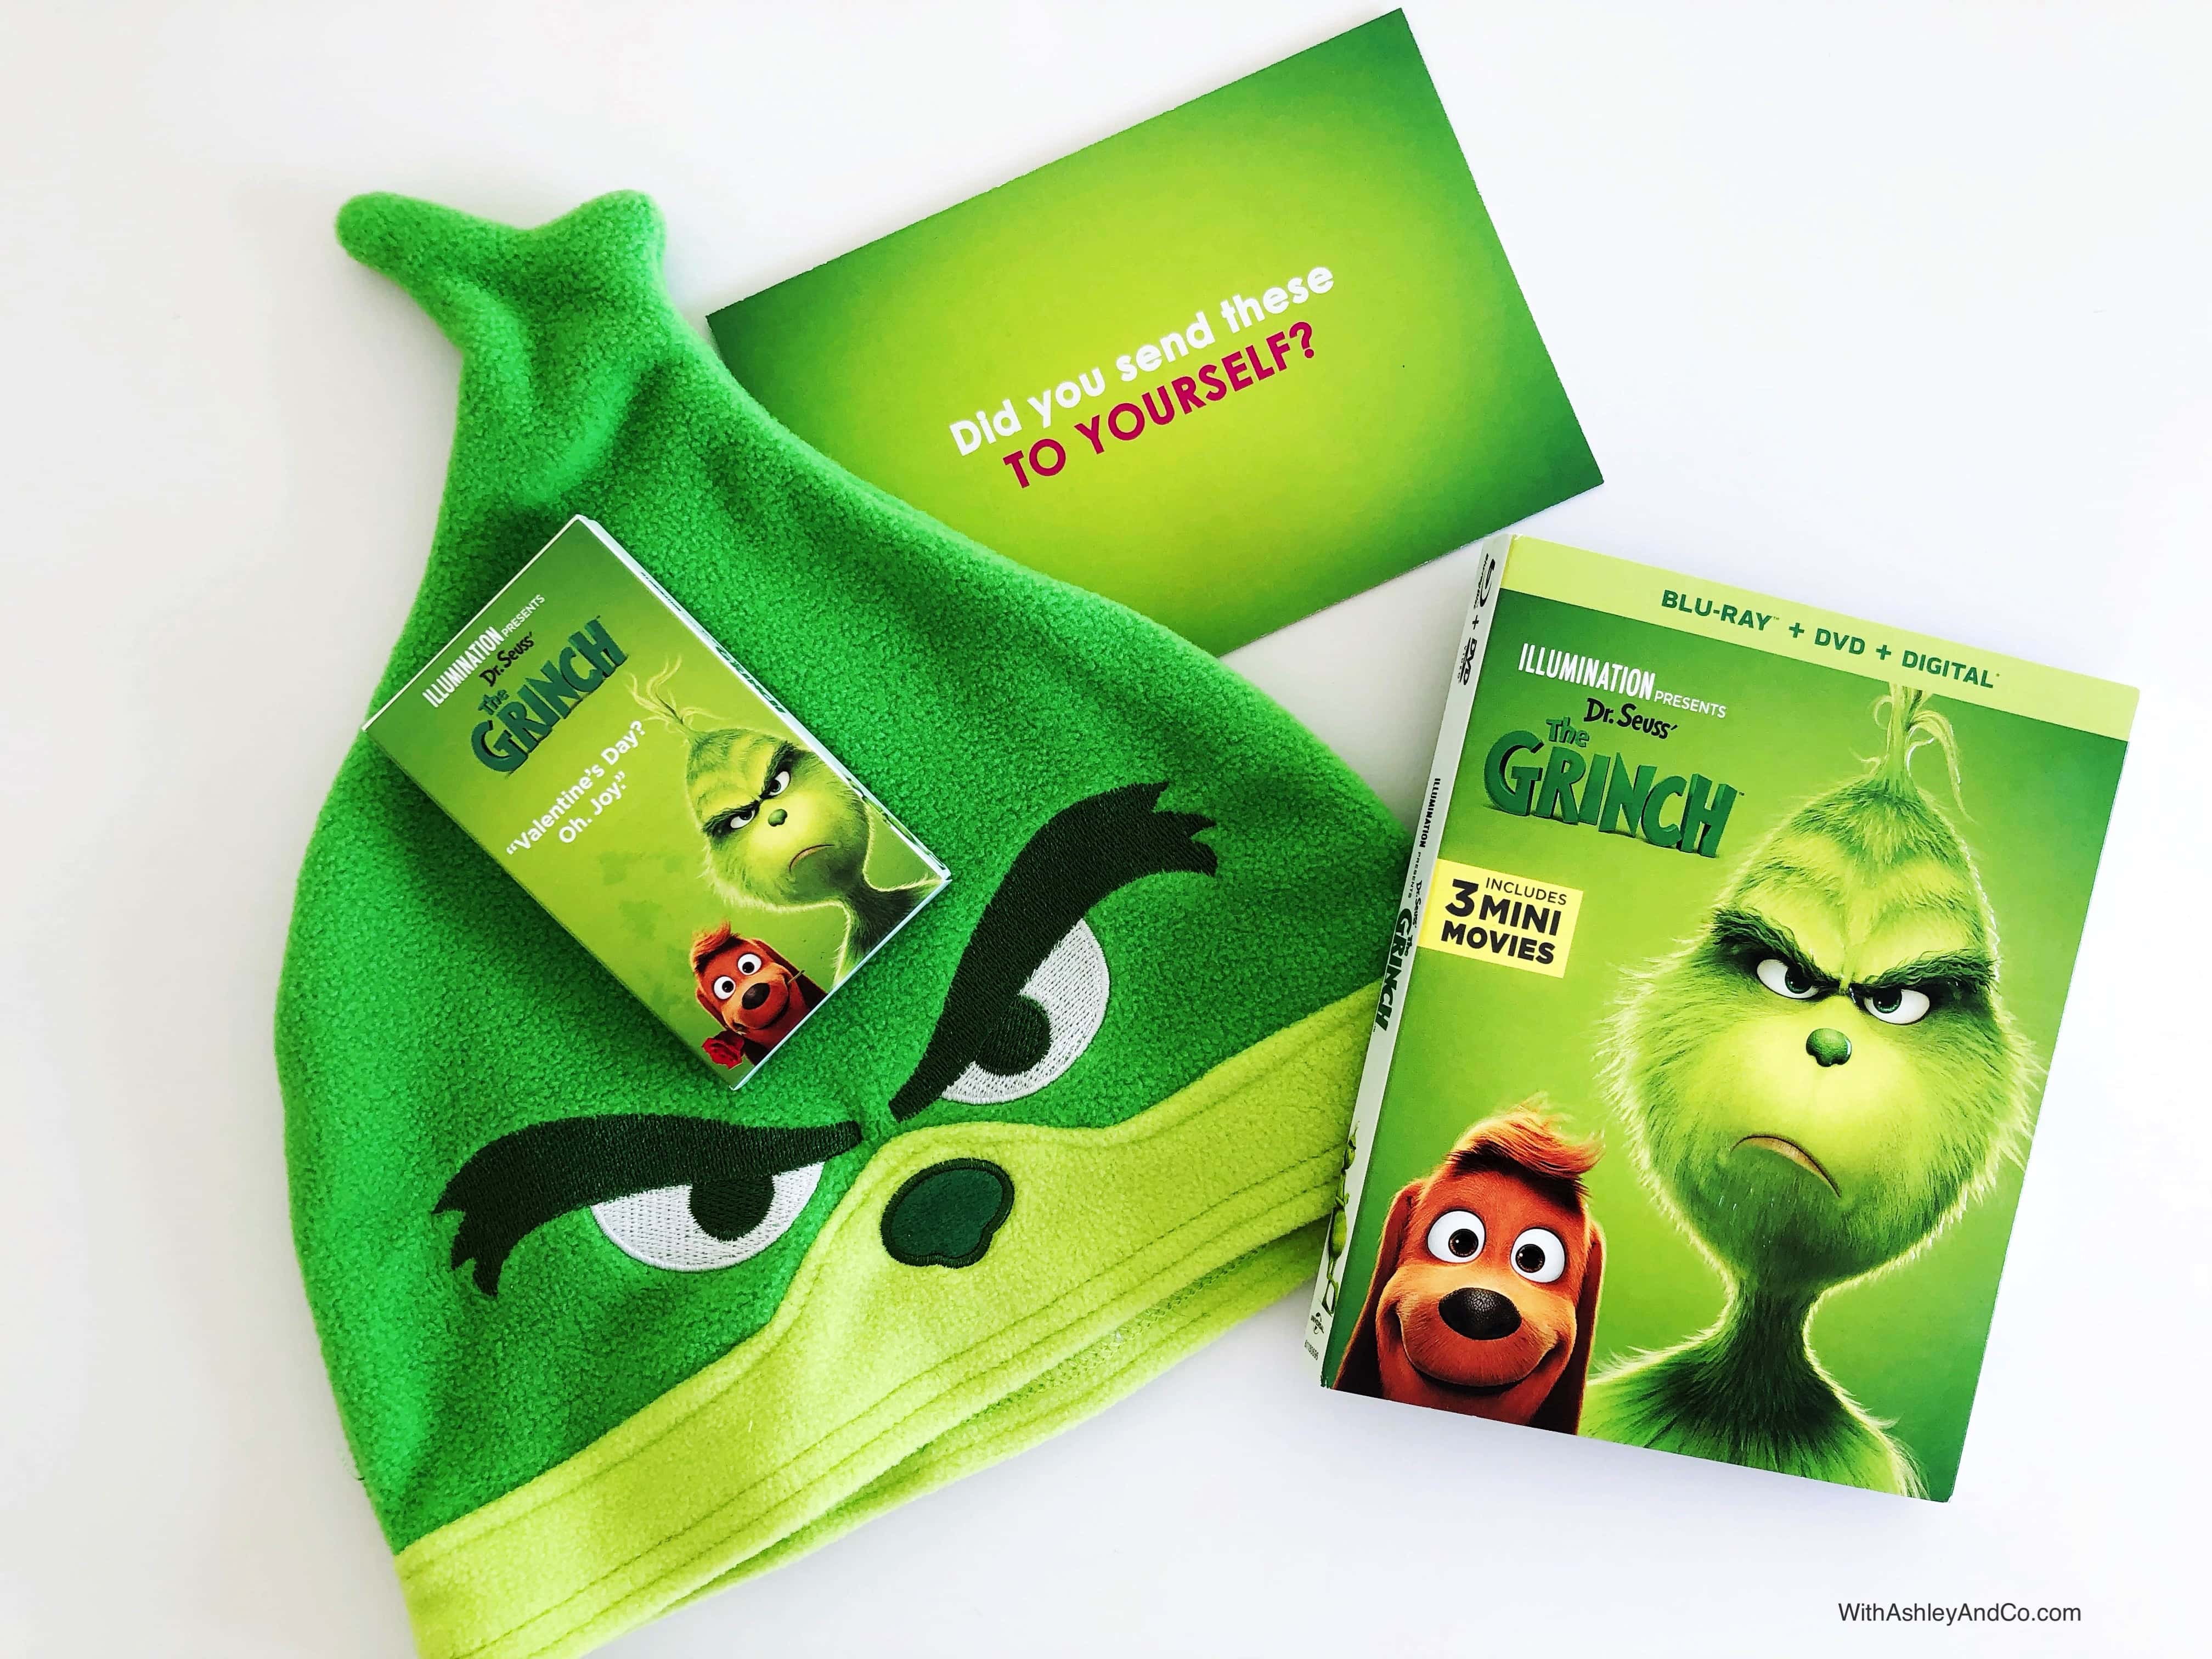 The Grinch Blu-ray Prize Pack